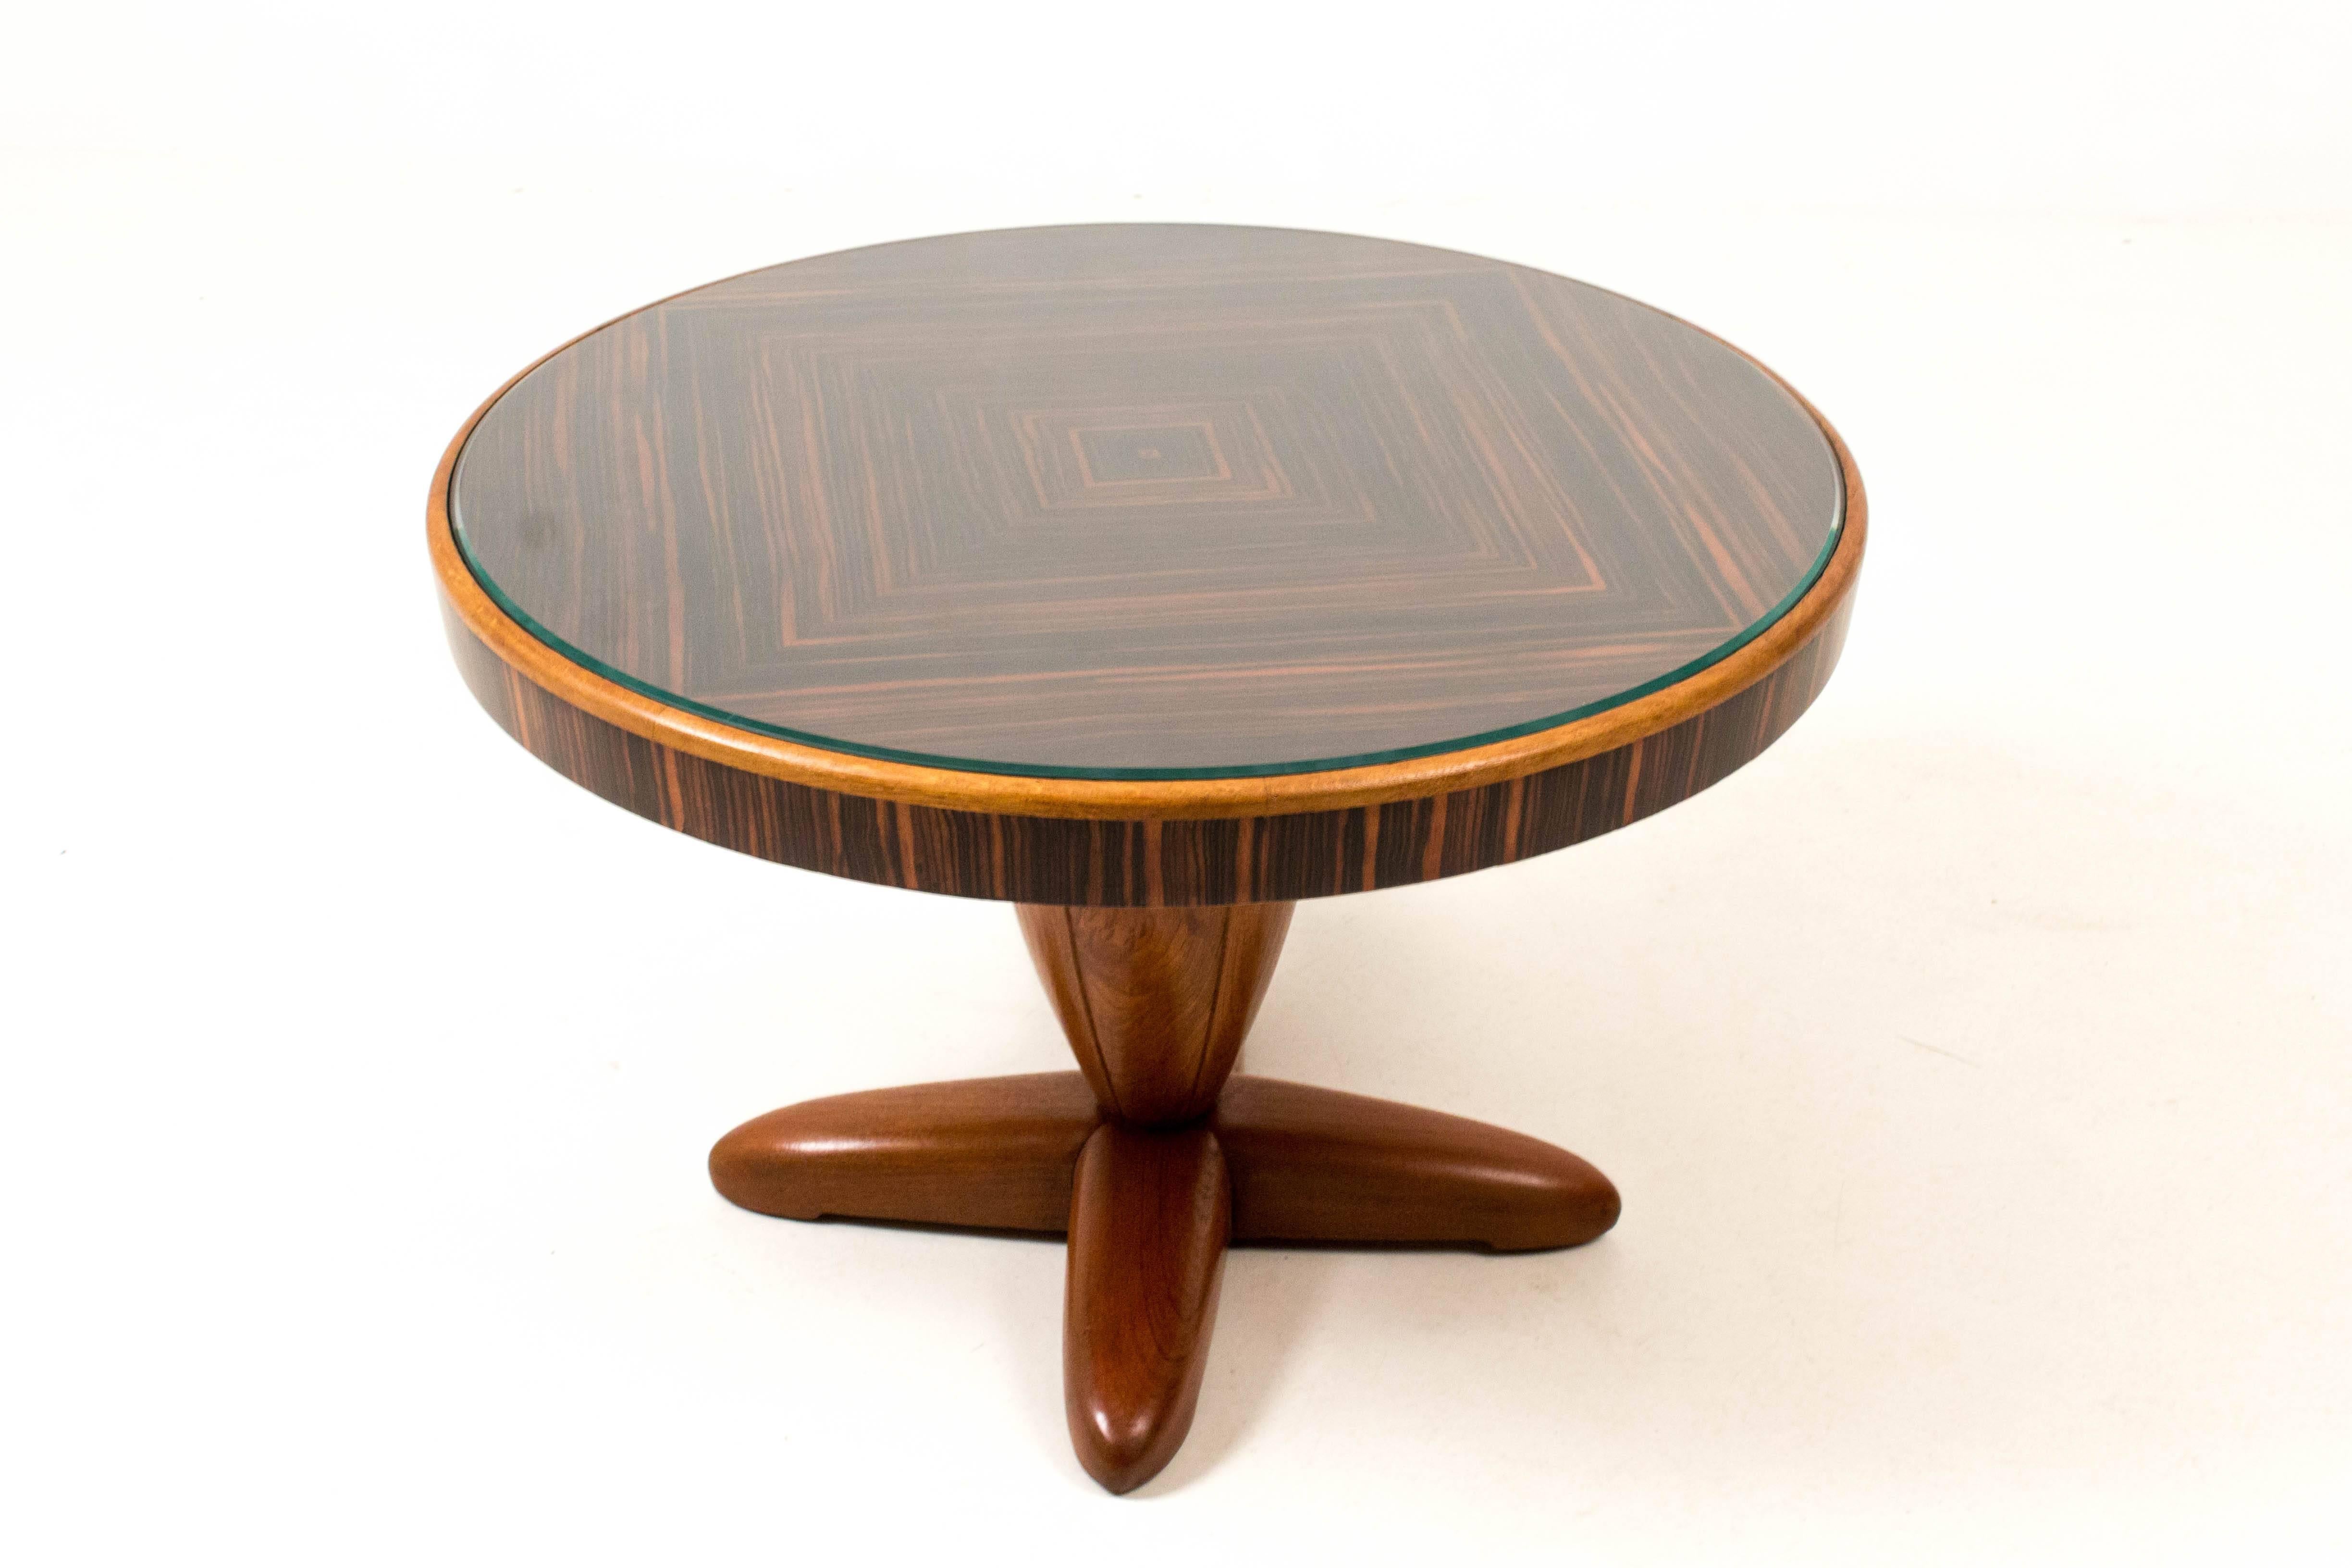 Stunning and rare Art Deco coffee table by Paul Bromberg for Pander 1931.
Solid teak base and Macassar ebony veneered top.
Beveled glass cover.
Executed with ball-bearing, enabling the top to rotate.
In good original condition with minor wear